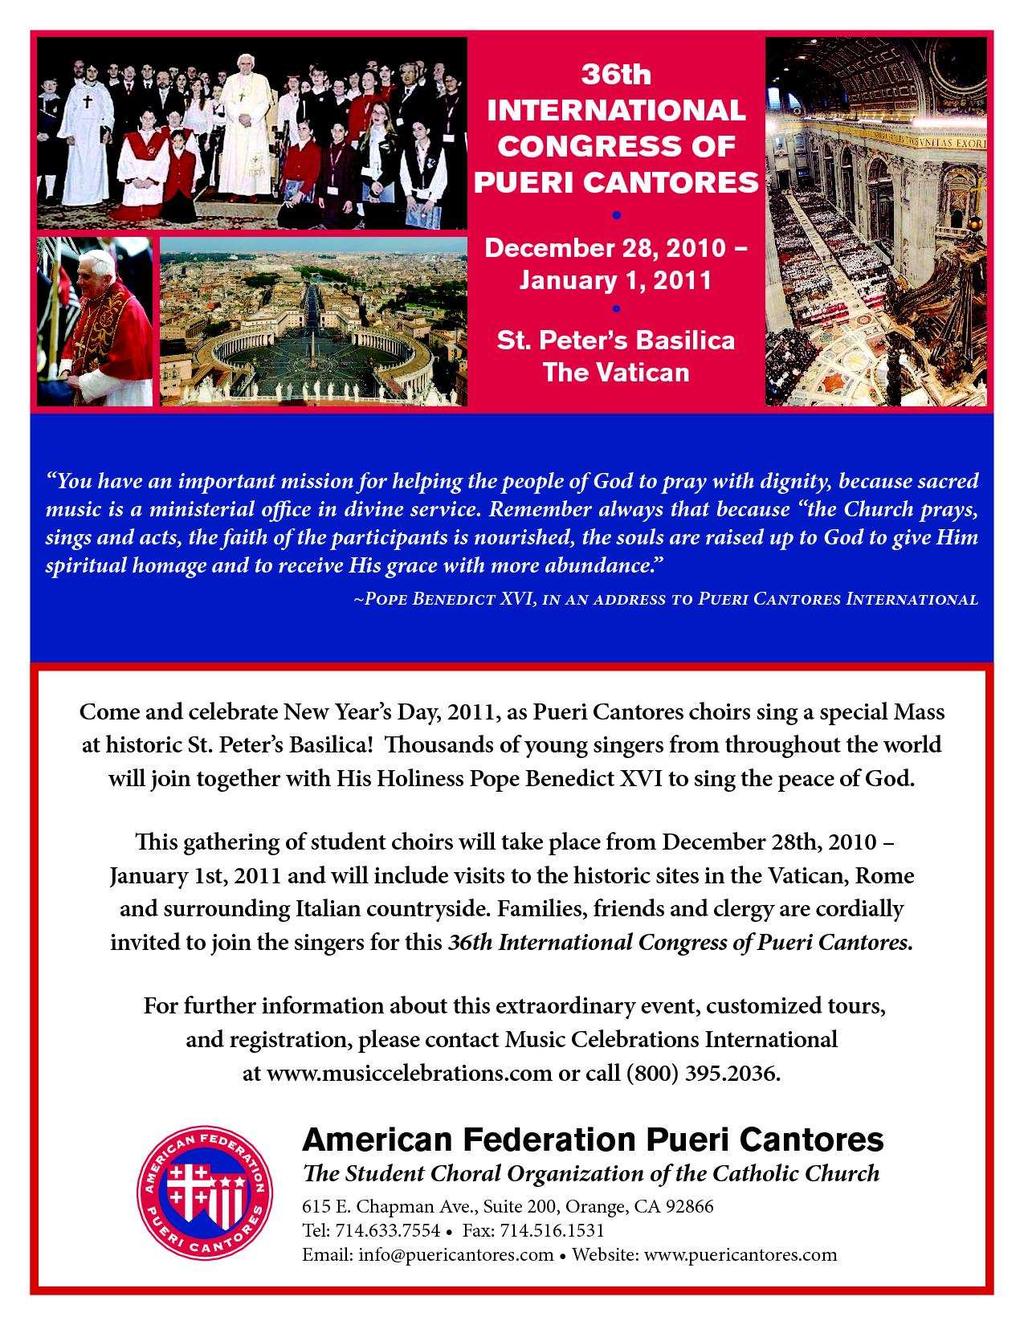 Celebratory Mass with the Pope 2011 Start planning today! Click HERE Fundraising ideas available on the AFPC website.